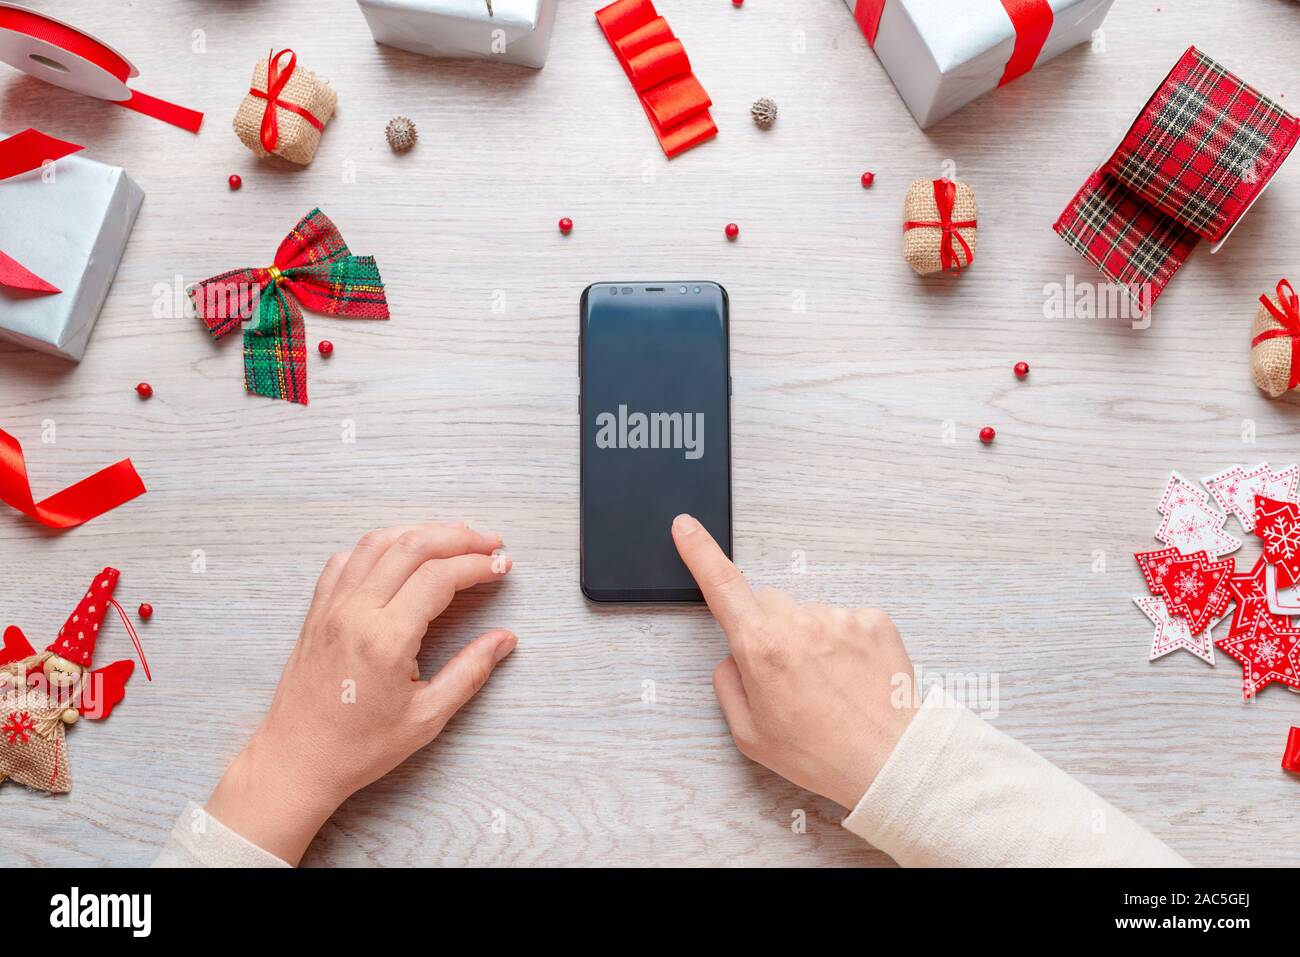 Hand touch blank phone display on a wooden desk surrounded by Christmas decorations and gifts. Concept of online shopping at Christmas time. Top view Stock Photo